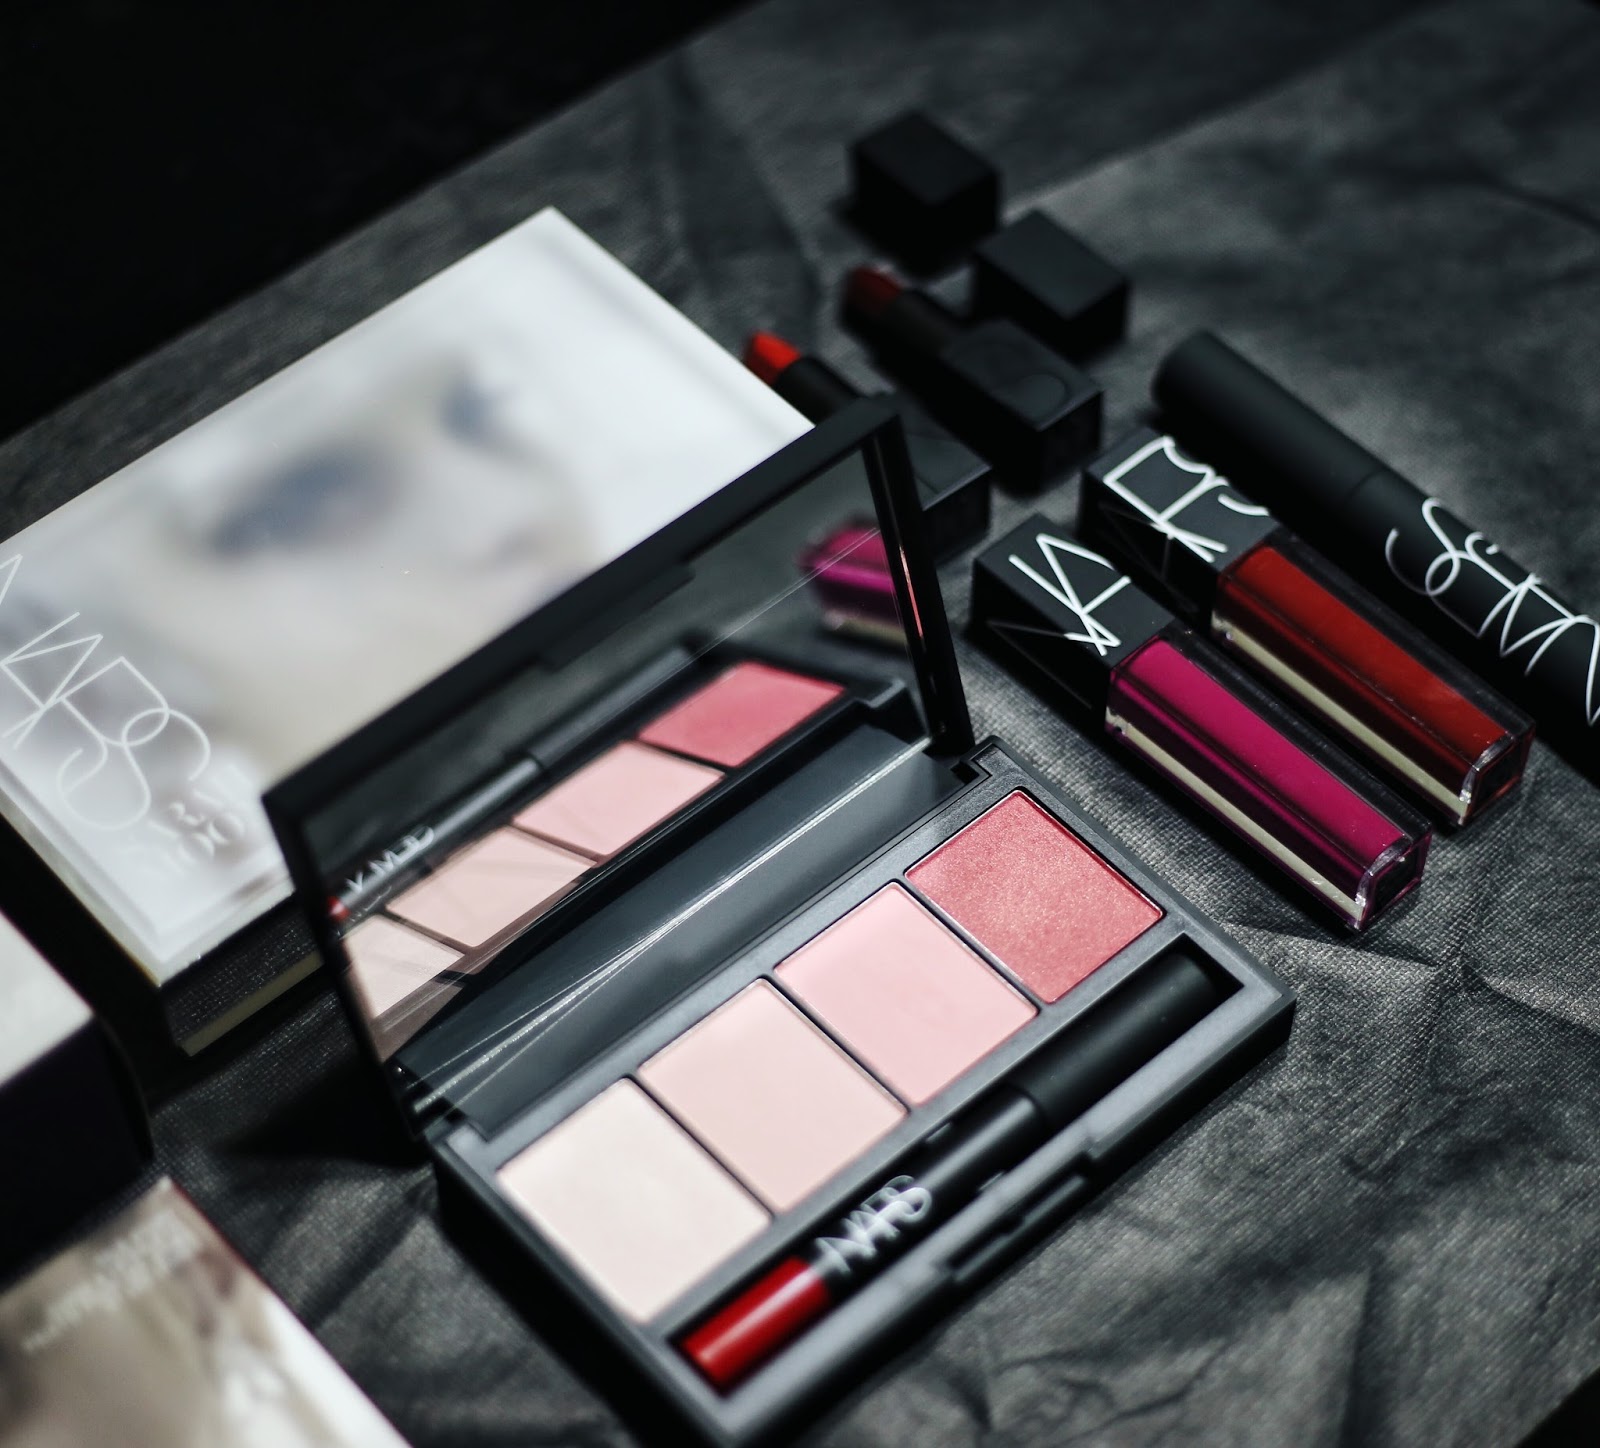 Nars holiday 2016, sarah moon, true love, face and cheeks, velvet lip glide, review, singapore